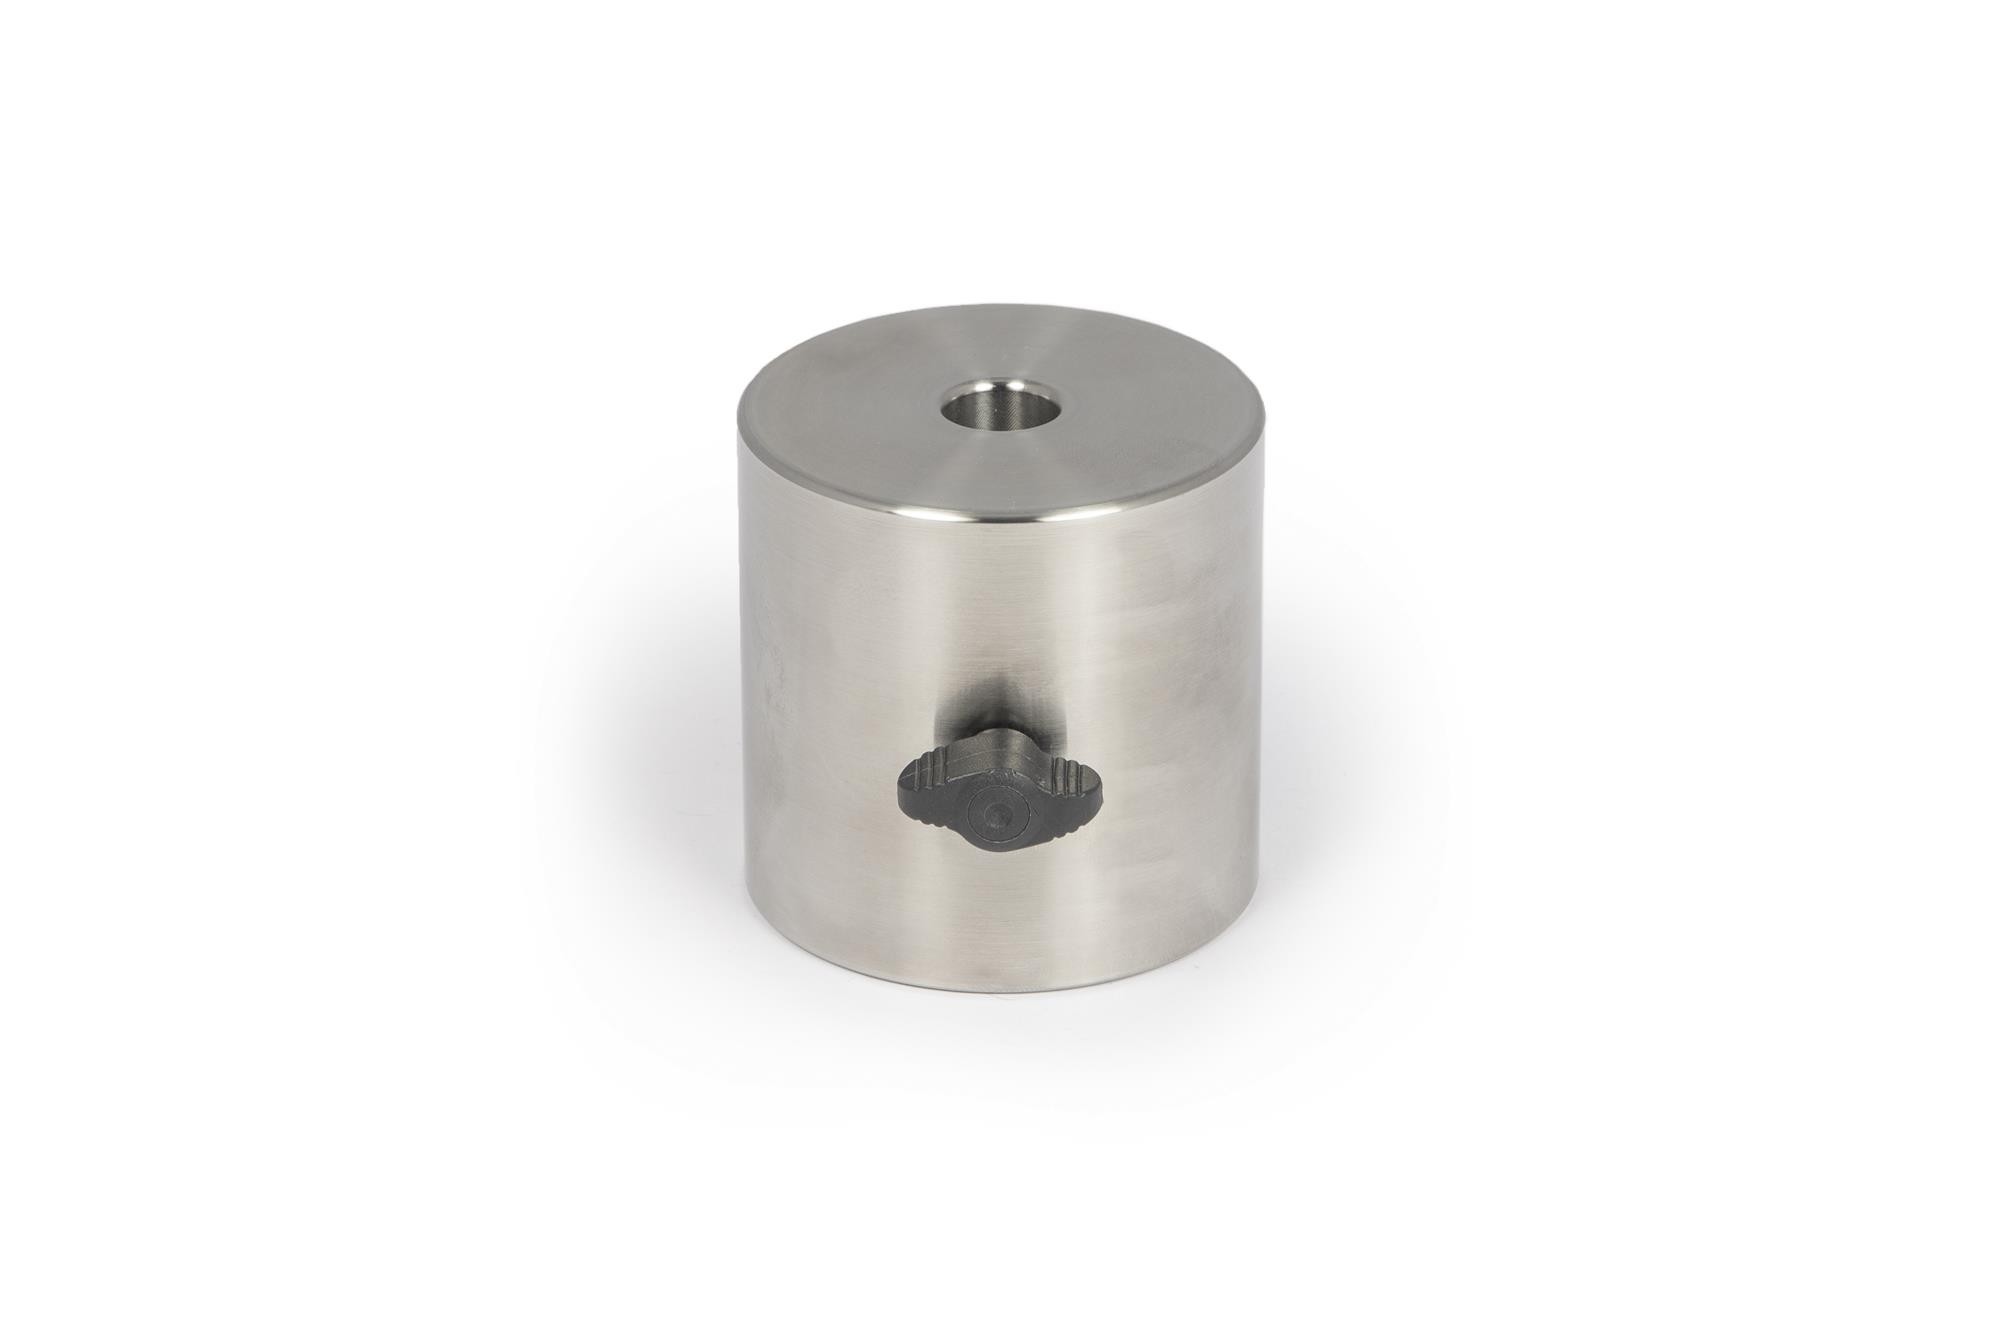 2.5 kg leveling counterweight Ø 75x75mm, made of V2A stainless steel